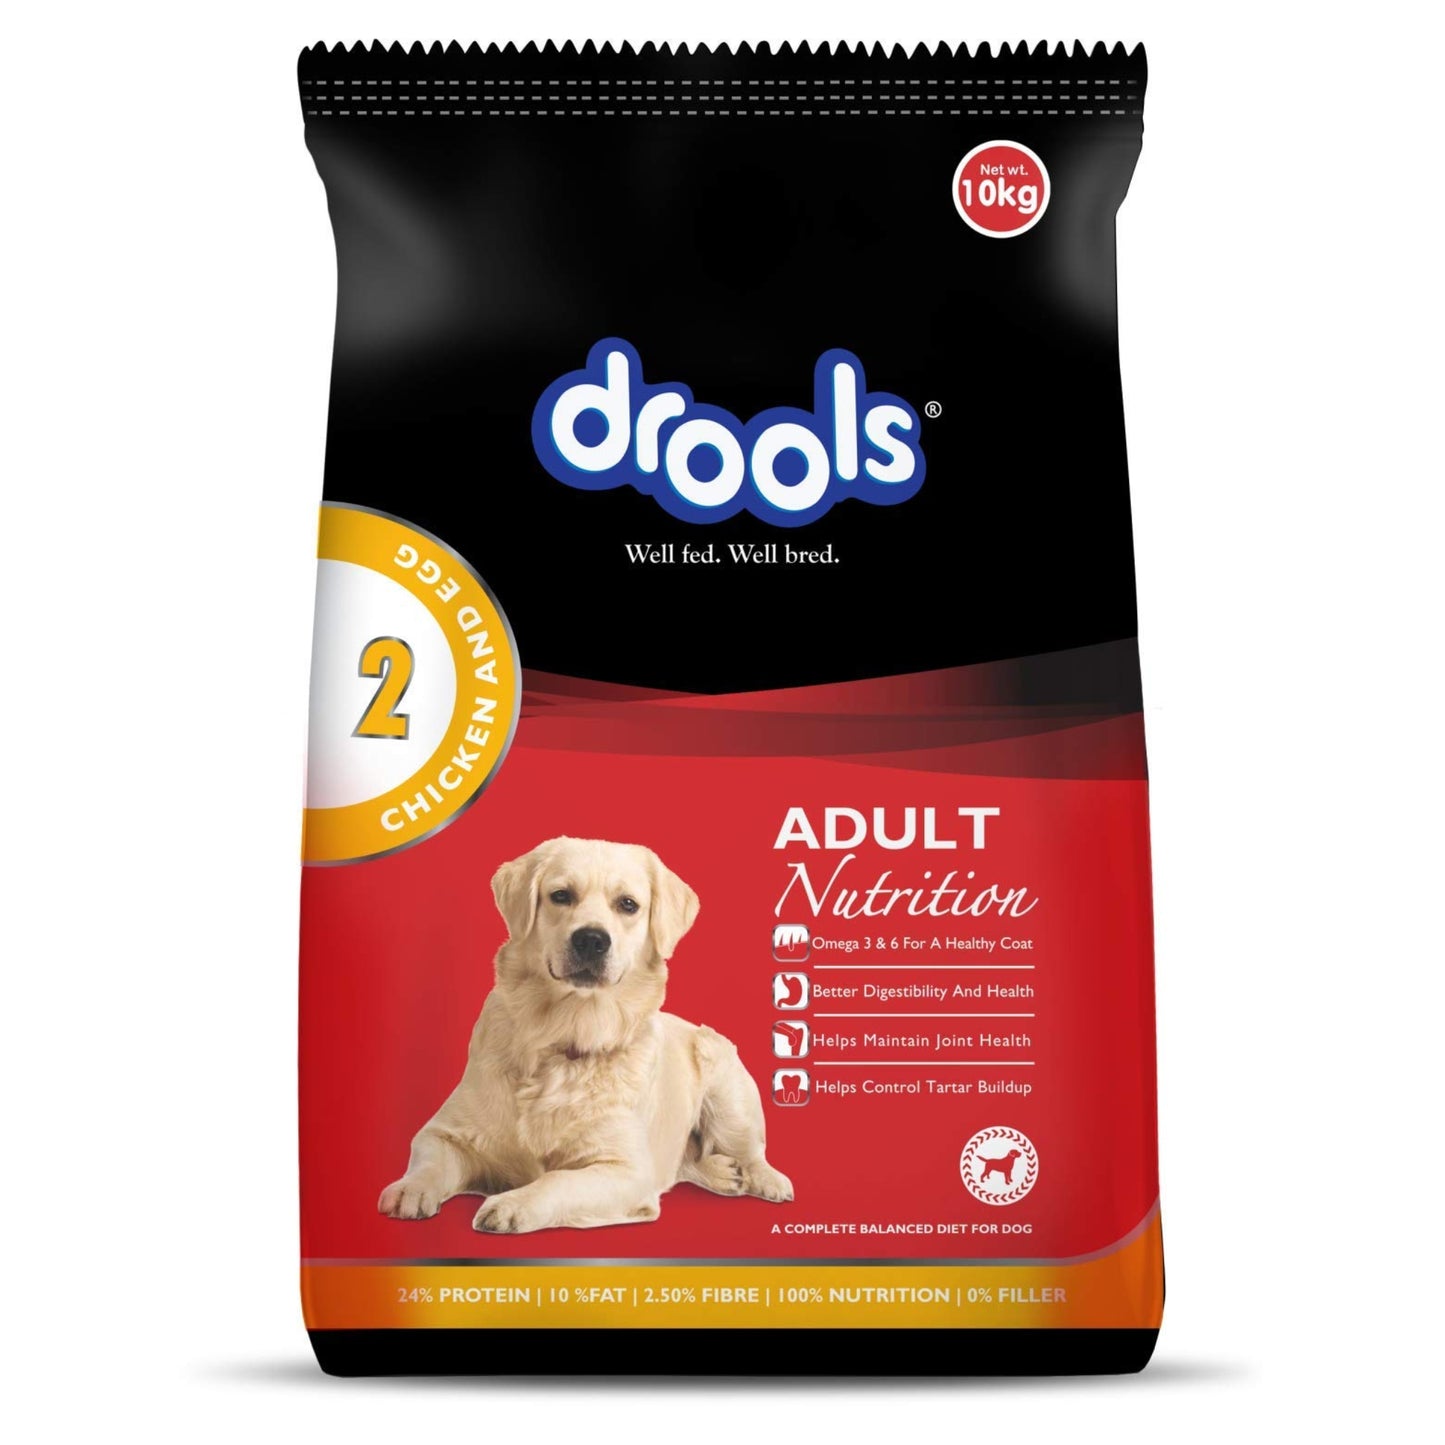 Drools Adult Dry Dog Food, Chicken and Egg, 10Kg